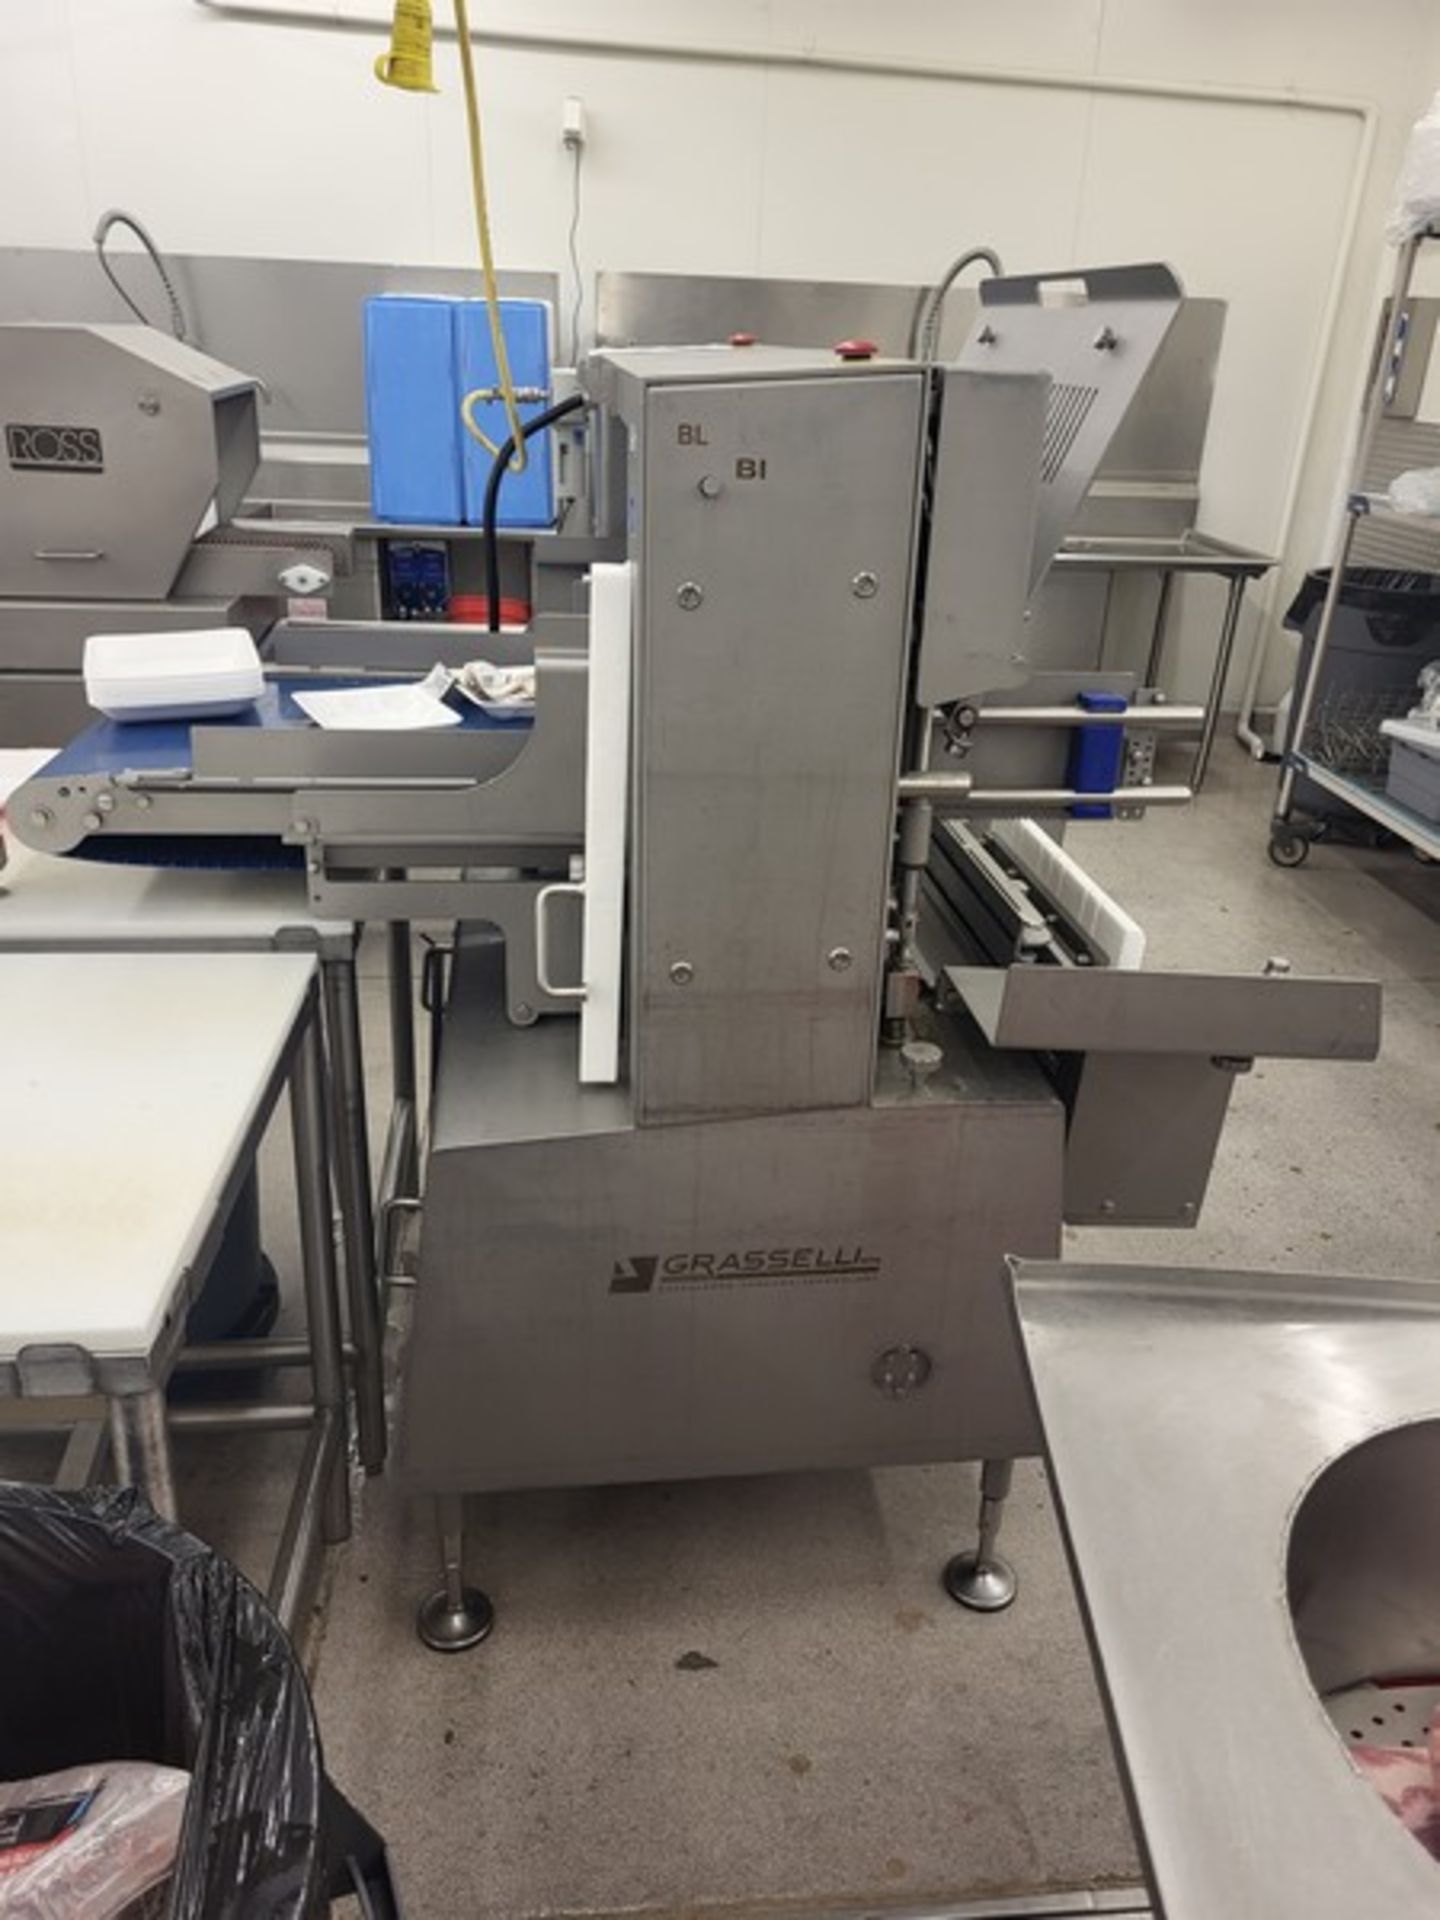 Grasselli Vertical Meat Slicer, Model NSL600 (2013), 208 Volts, 3 Phase for Obtaining Perfectly Even - Image 2 of 4